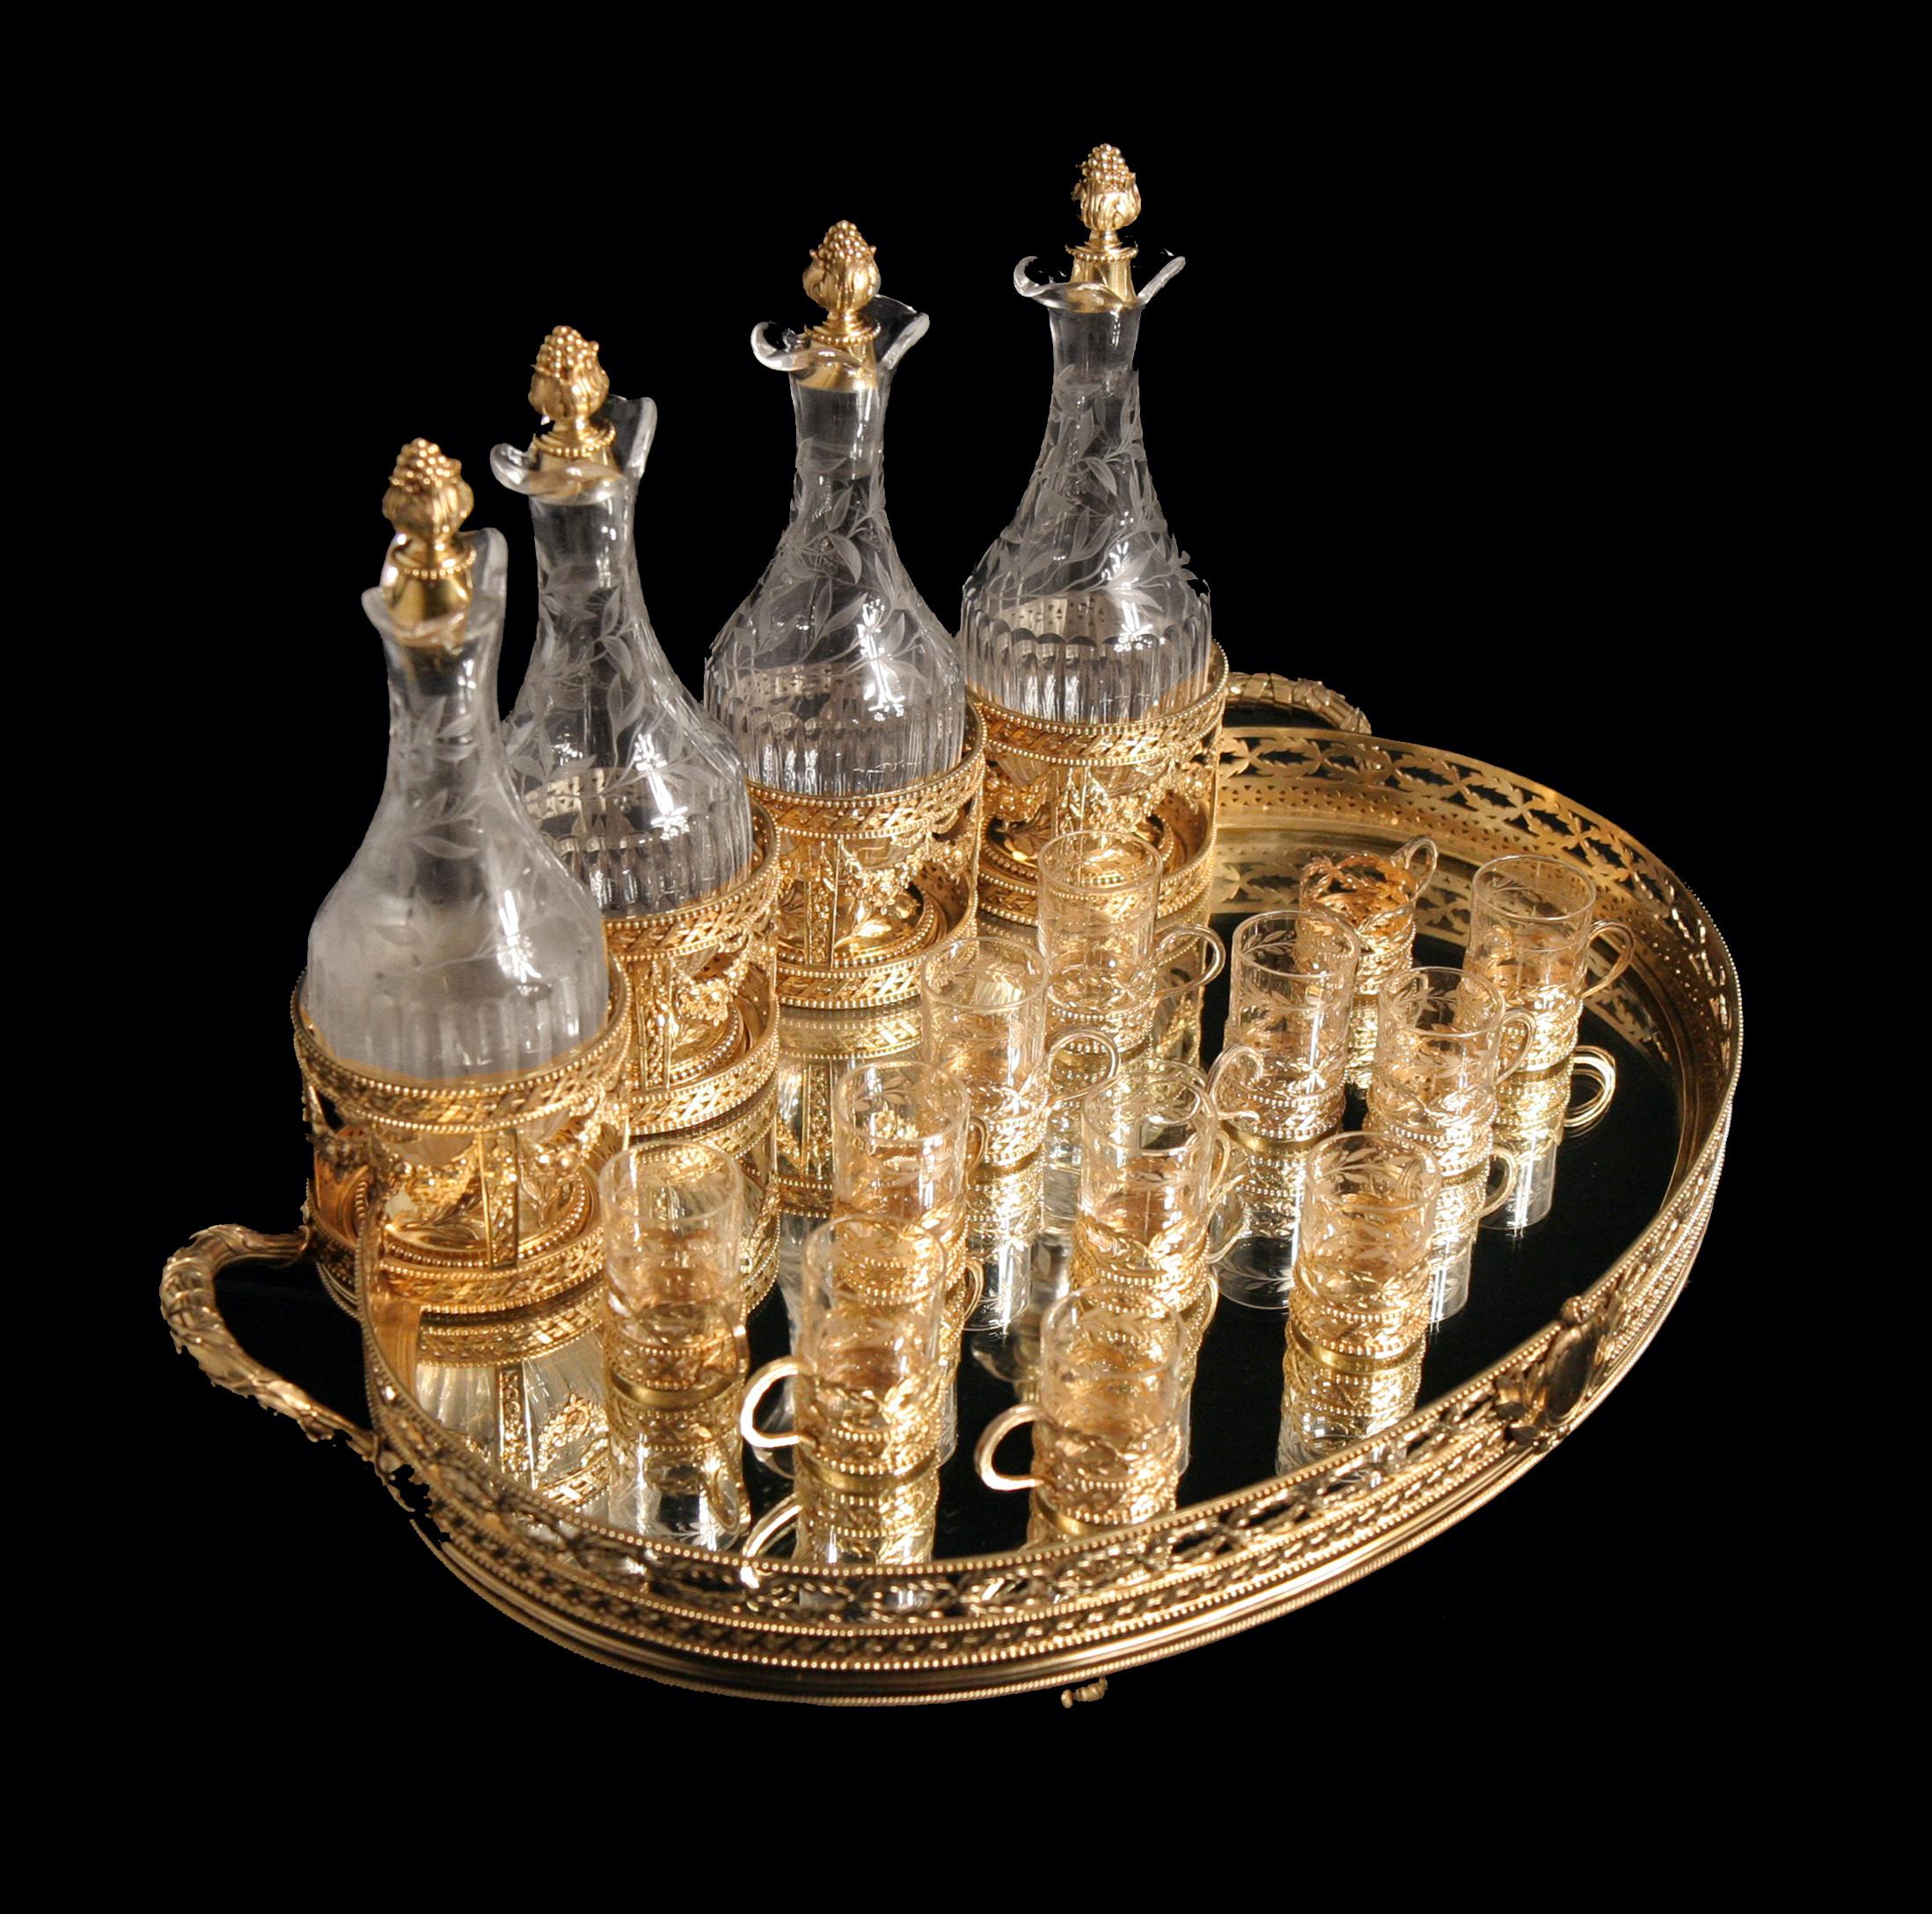 Direct from a Private Chateau in the South of France, A Magnificent 17pc. 19th Century Gold Plated 950 Sterling Silver (Vermeil) Napoleon III Liqueur Serving Set by the World's Premier French Silversmith Jean-Baptiste Odiot, circa late 1890s.  

The